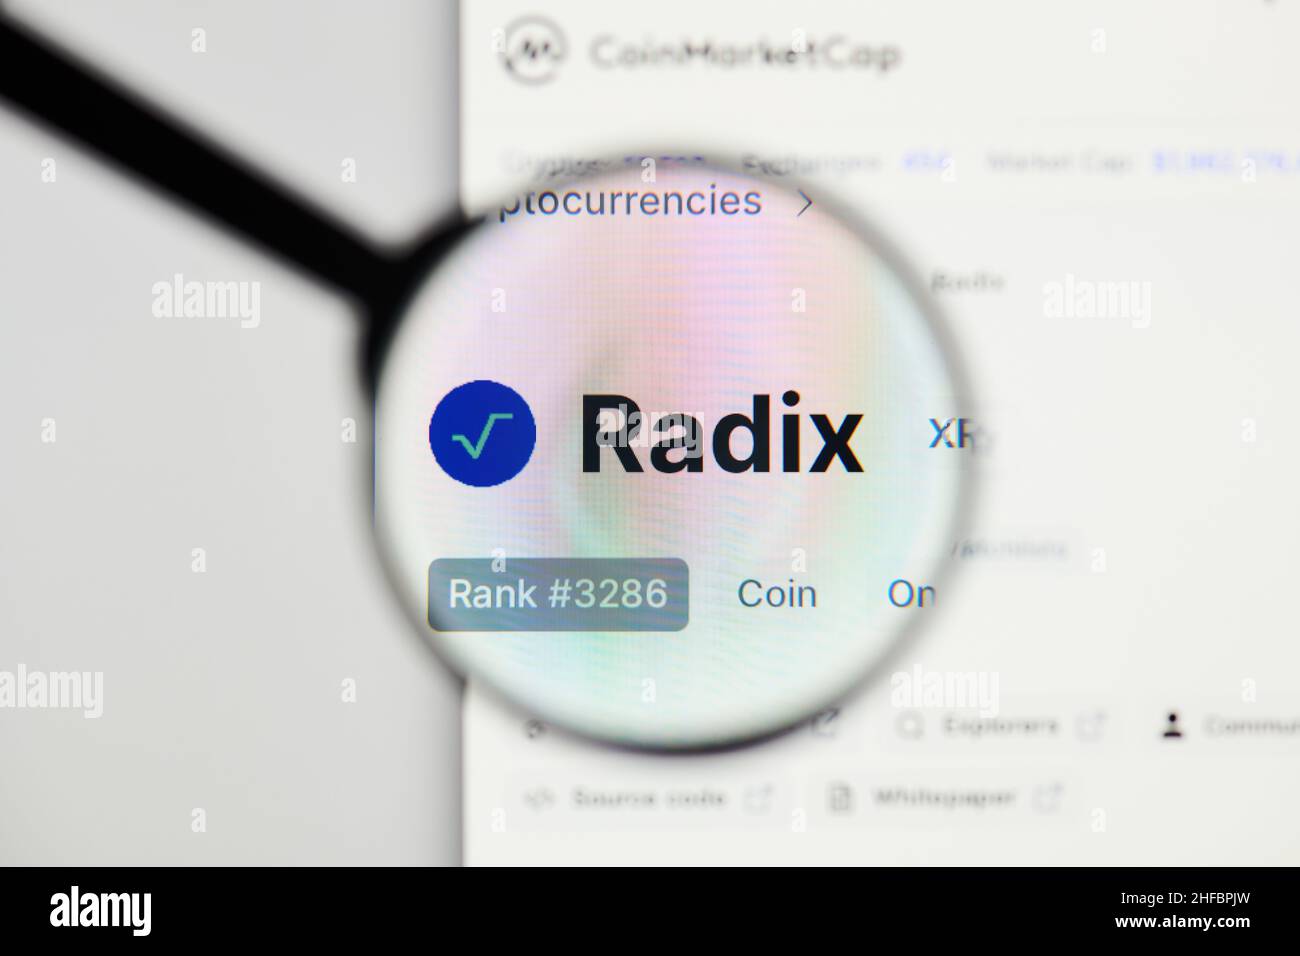 Milan, Italy - January 11, 2022: radix - XRD website's hp.  radix, XRD coin logo visible through a loope. Defi, ntf, cryptocurrency concepts illustrat Stock Photo